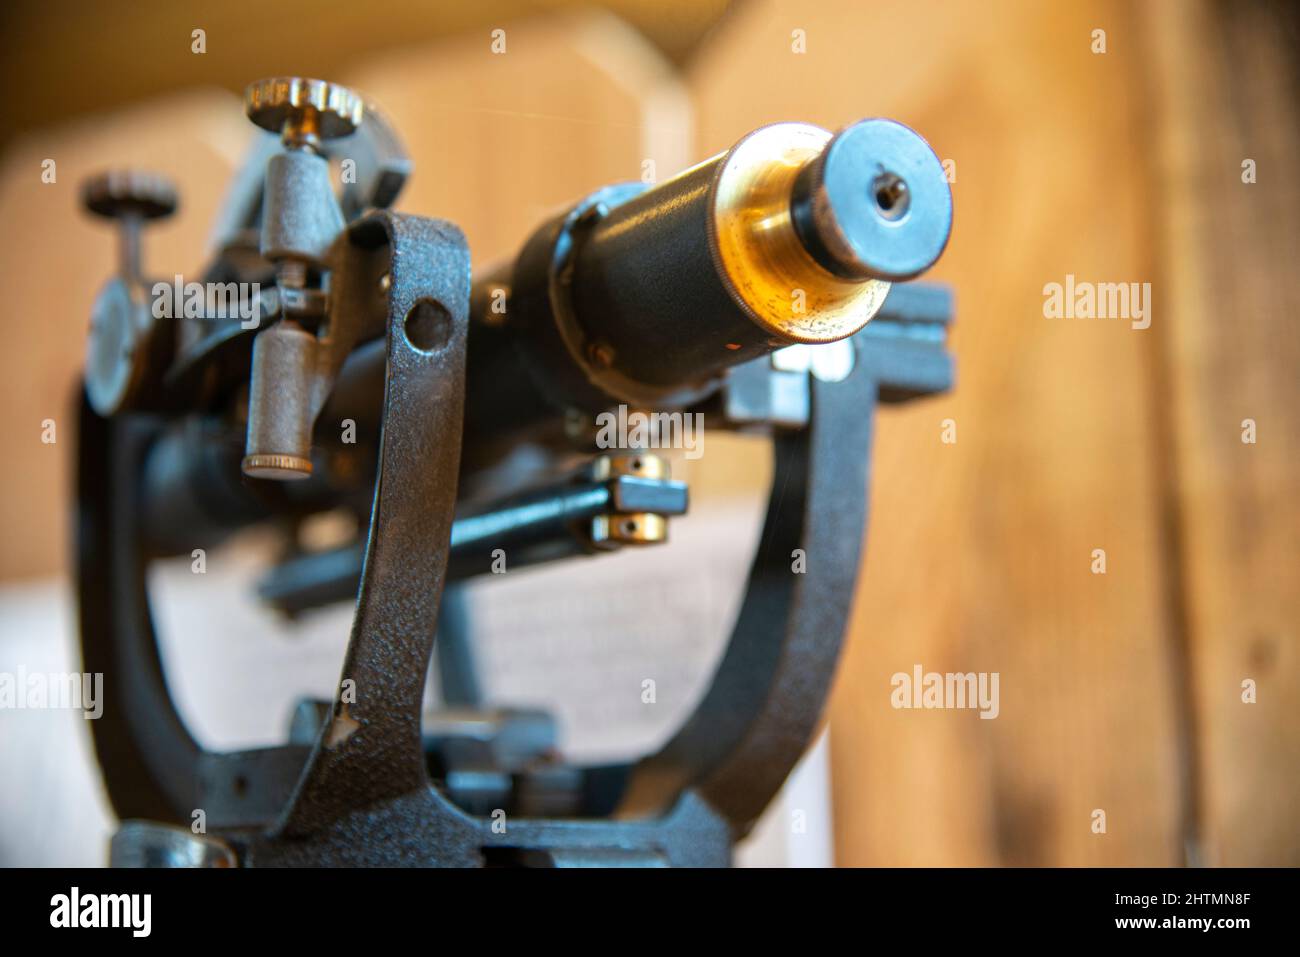 theodolite tool used to servey the land and make maps Stock Photo